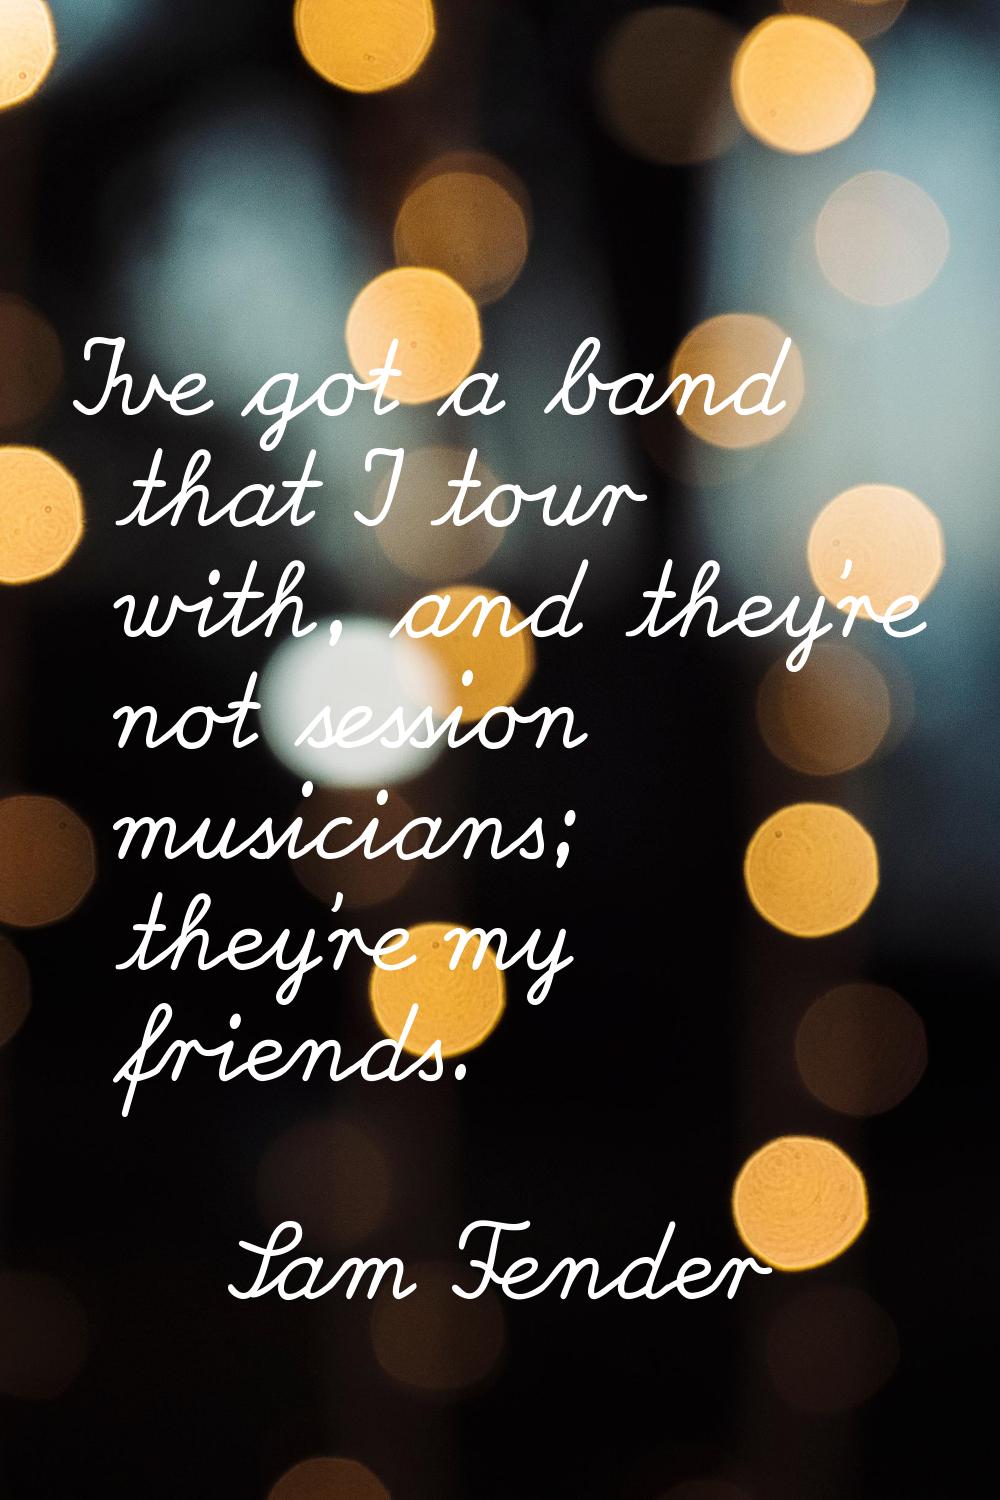 I've got a band that I tour with, and they're not session musicians; they're my friends.